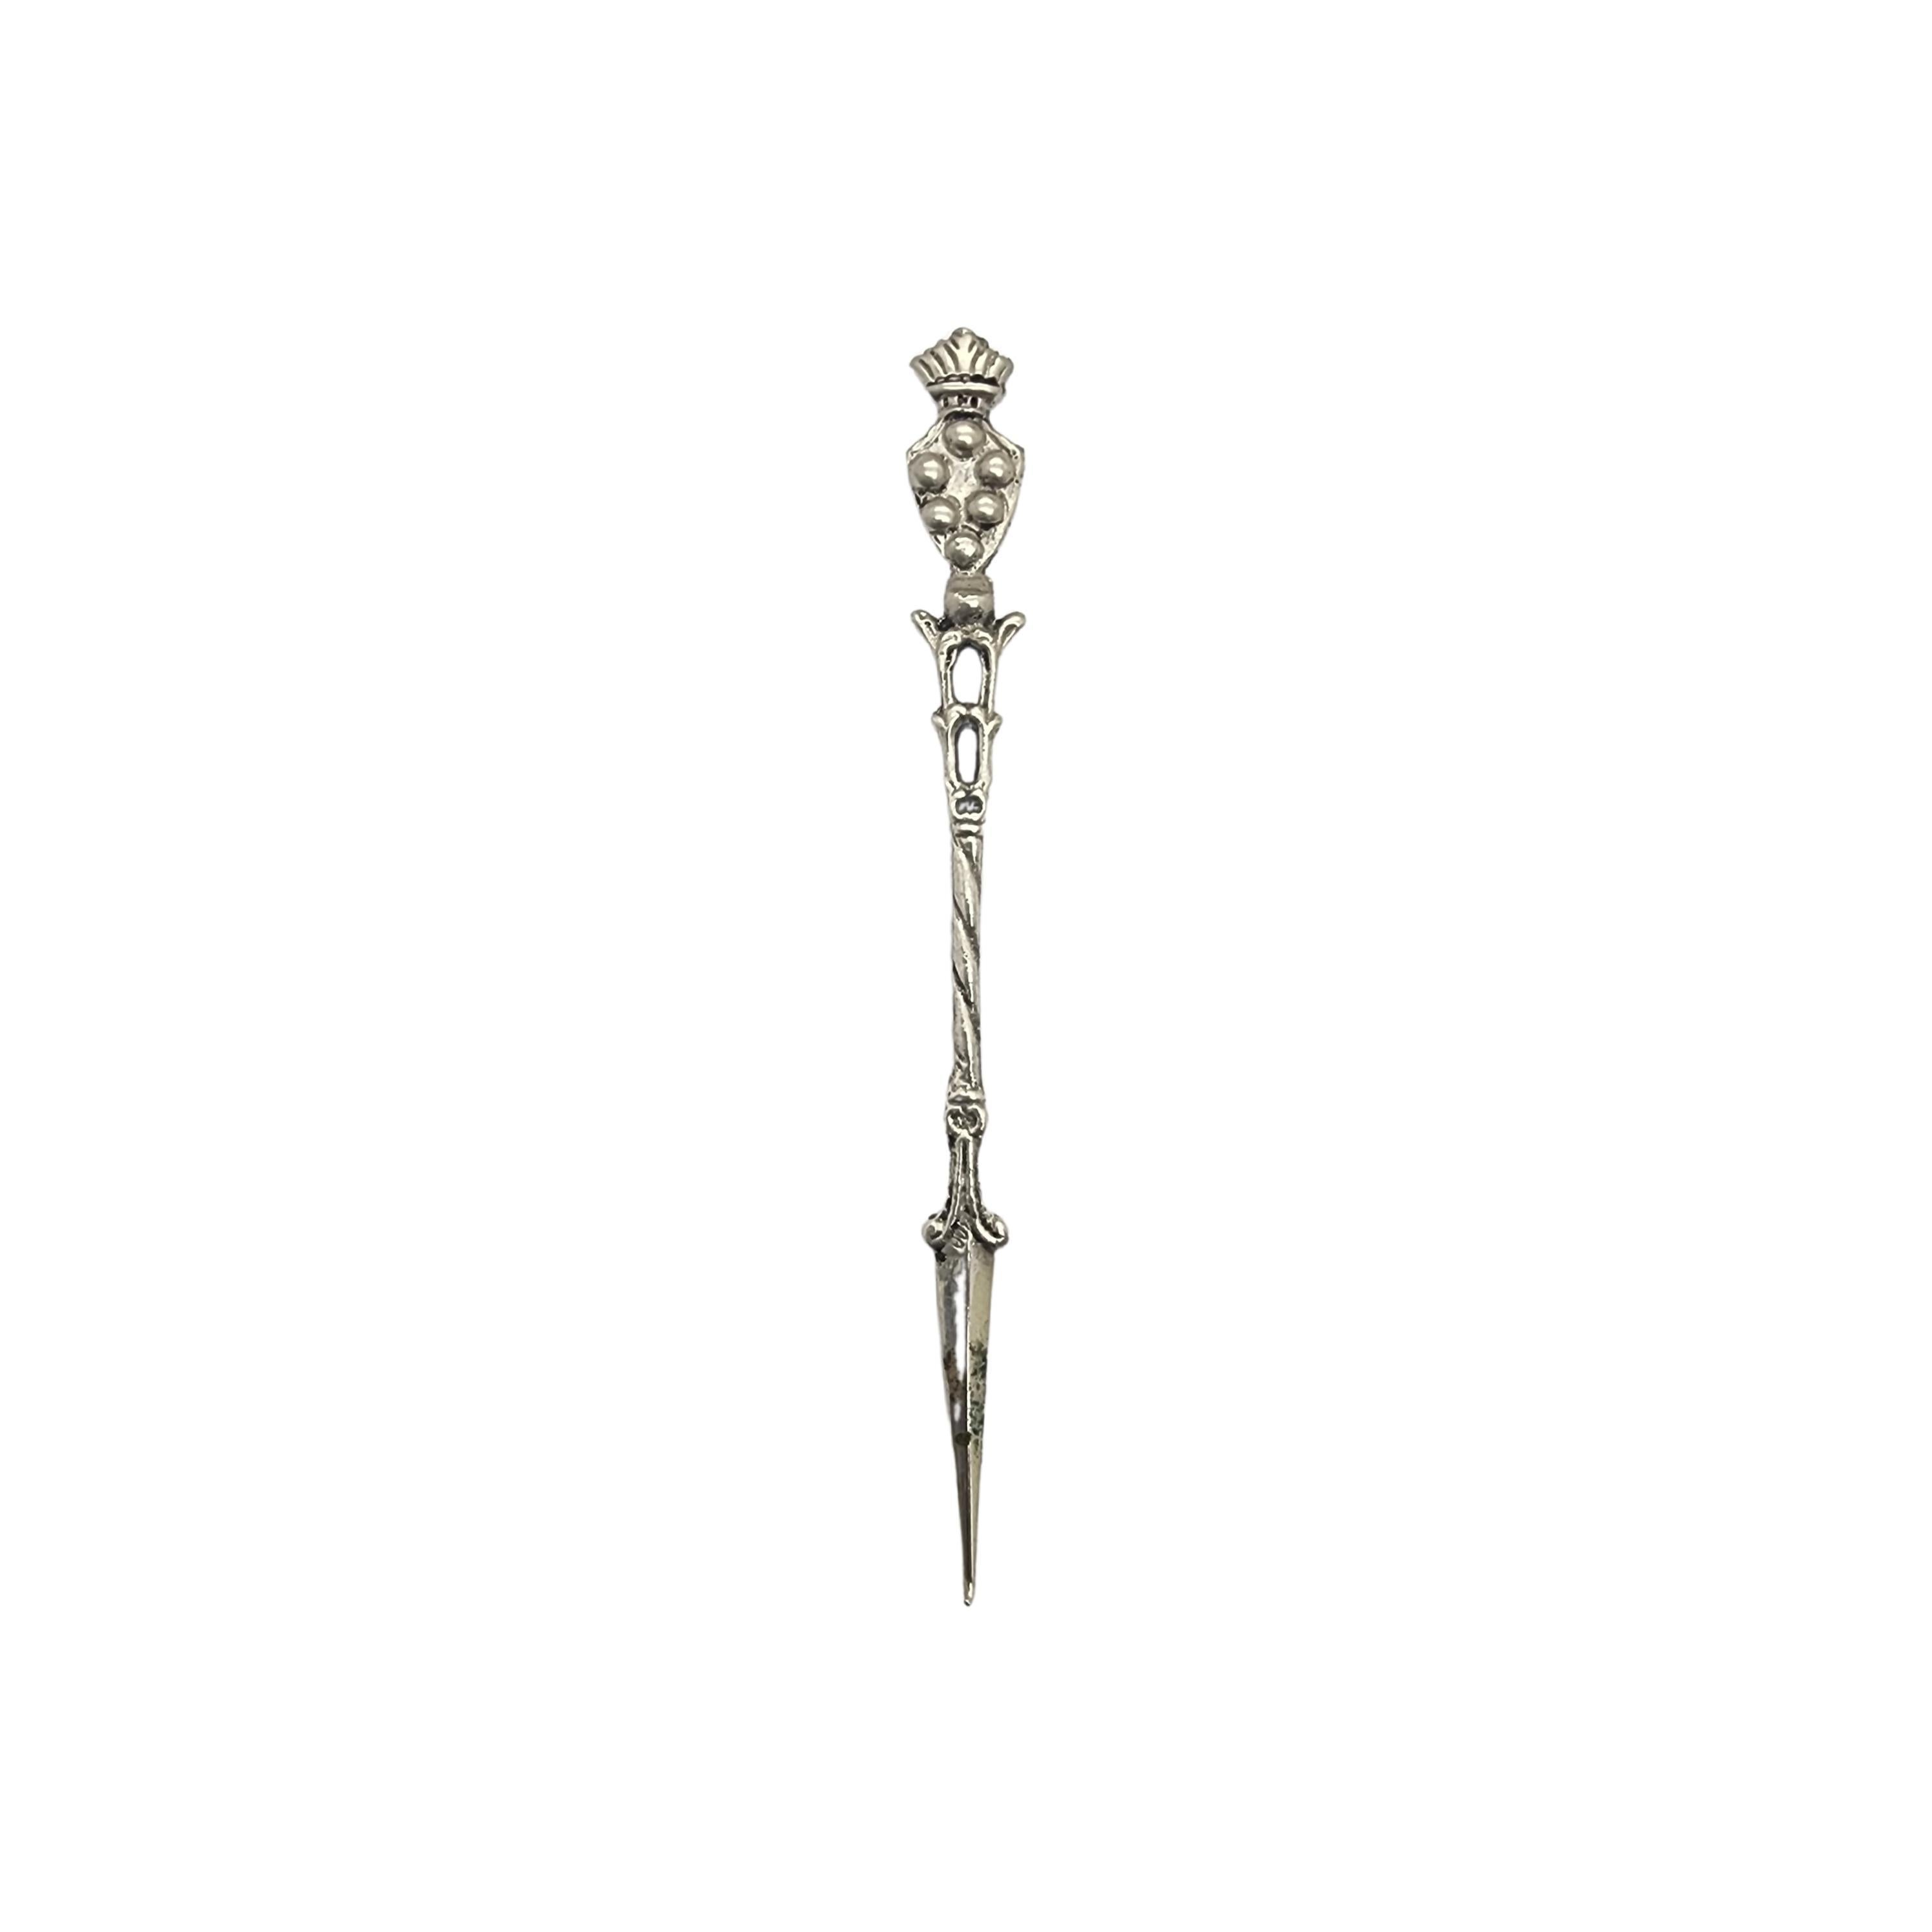 800 silver Fleur de Lis Shield nut pick.

This nut pick is topped with a shield and features a twist design.

Measure approx 4